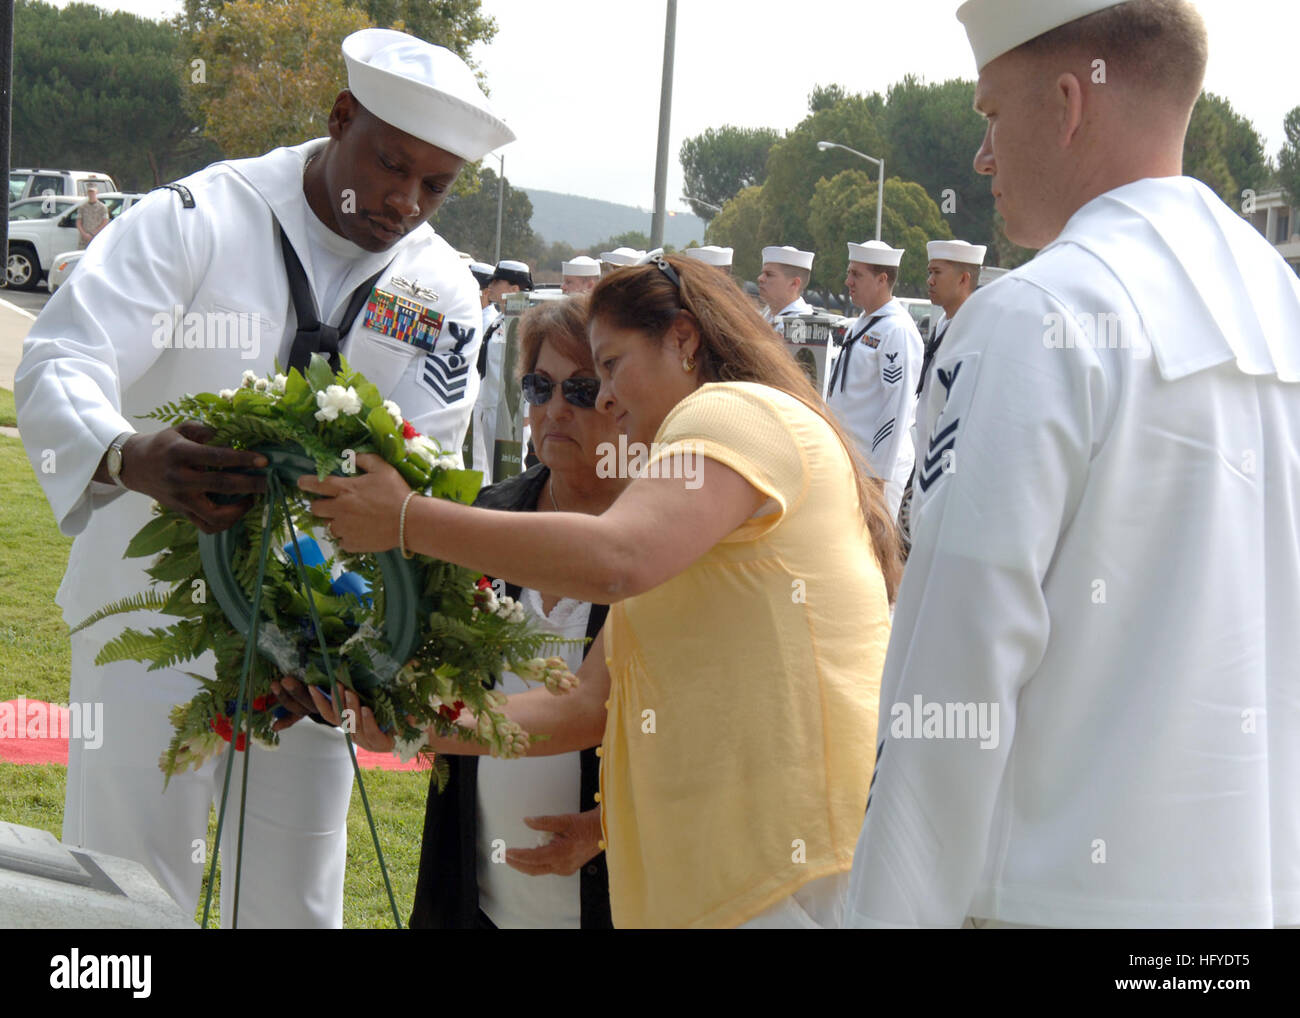 100917-N-3931M-174 CAMP PENDLETON, Calif. (Sept. 17, 2010) Esmeralda Denton, center left, wife of Hospital Corpsman 3rd Class Manuel Reyes Denton, and their daughter, Barbara Denton-Brownell, place a wreath on the Prisoner of War and Missing in Action Memorial at Naval Hospital Camp Pendleton during a service of remembrance on National POW/MIA Recognition Day. Assisting Denton are Petty Officers 1st Class Walter Hooks, left, and Alex Isenhour. (U.S. Navy photo by Mass Communication Specialist 1st Class Michael R. McCormick/Released) US Navy 100917-N-3931M-174 Family members place a wreath on t Stock Photo